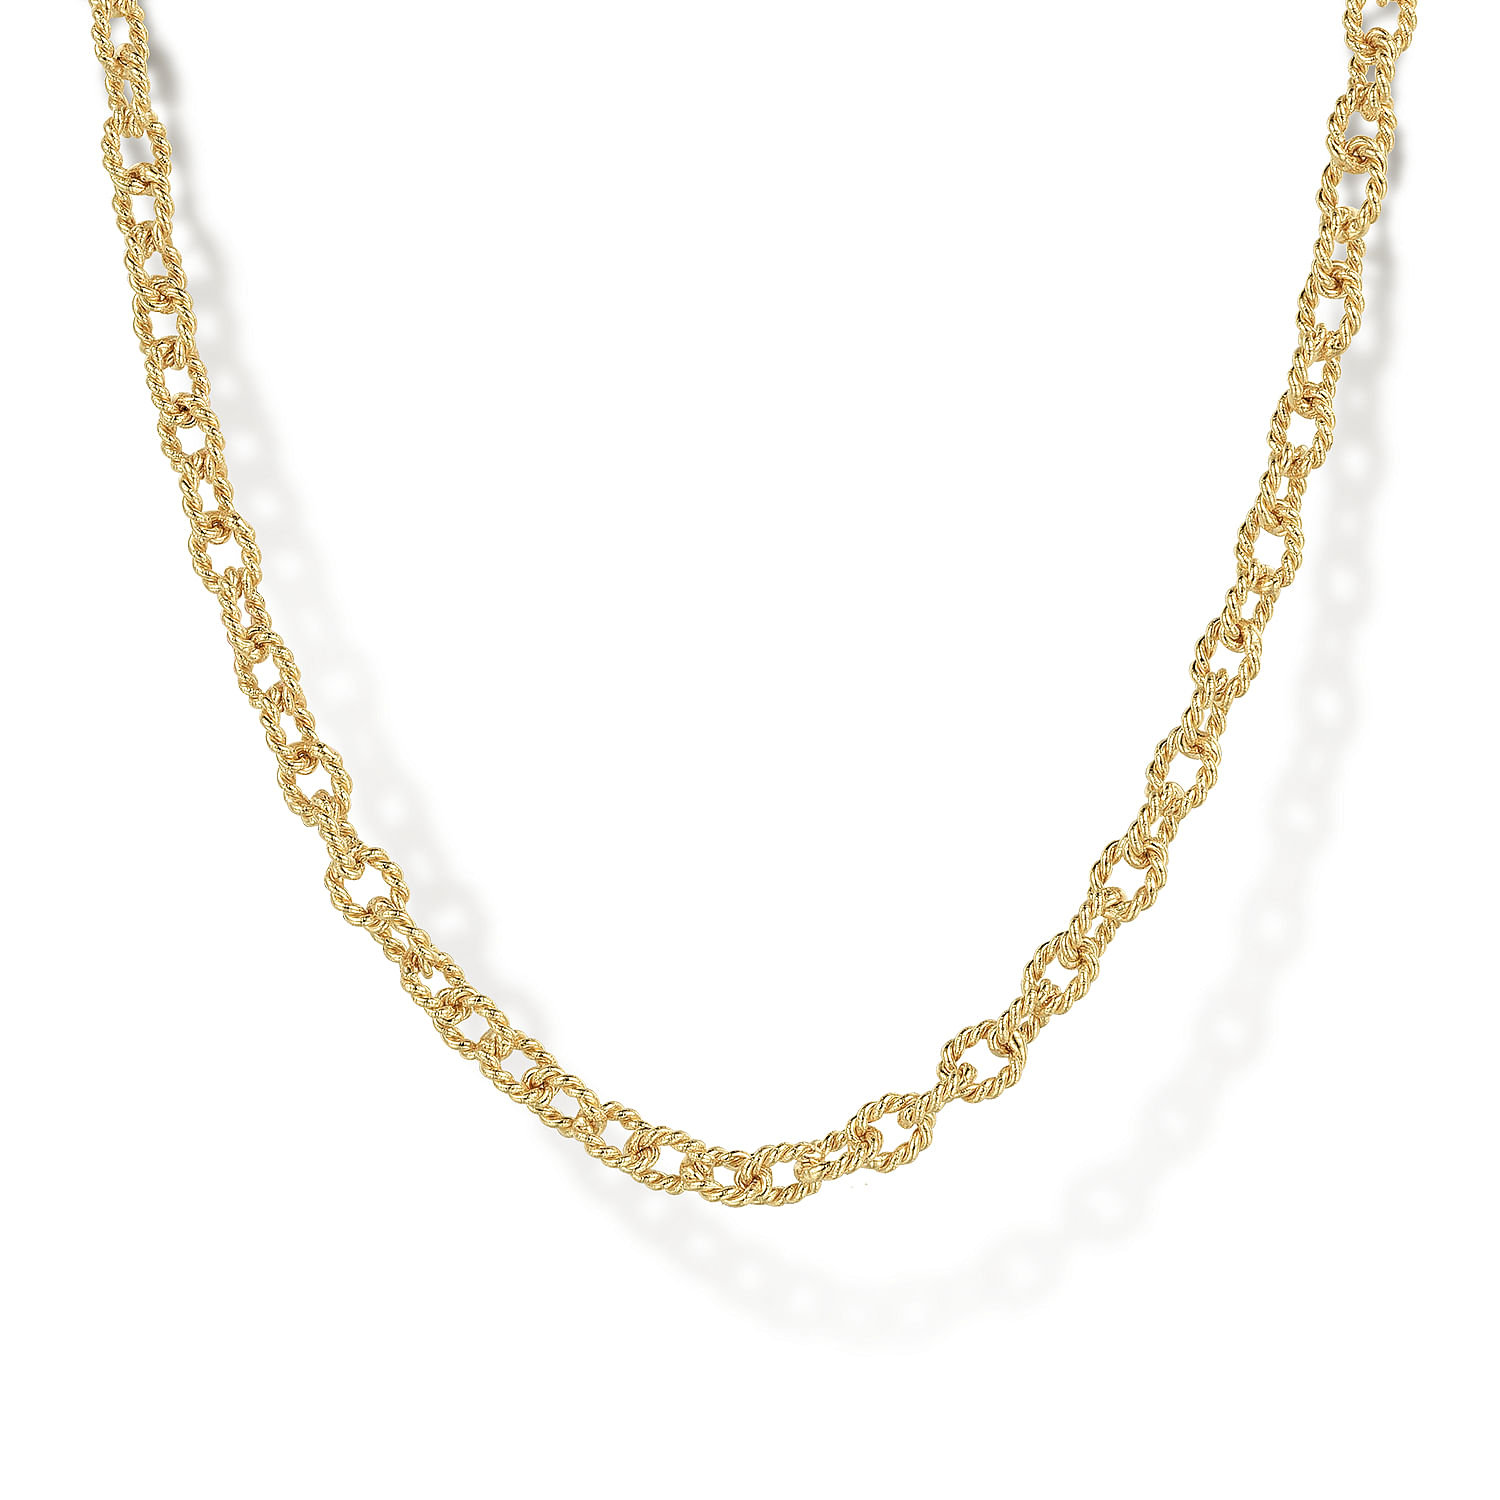 14K Yellow Gold Twisted Rope Link Chain Necklace